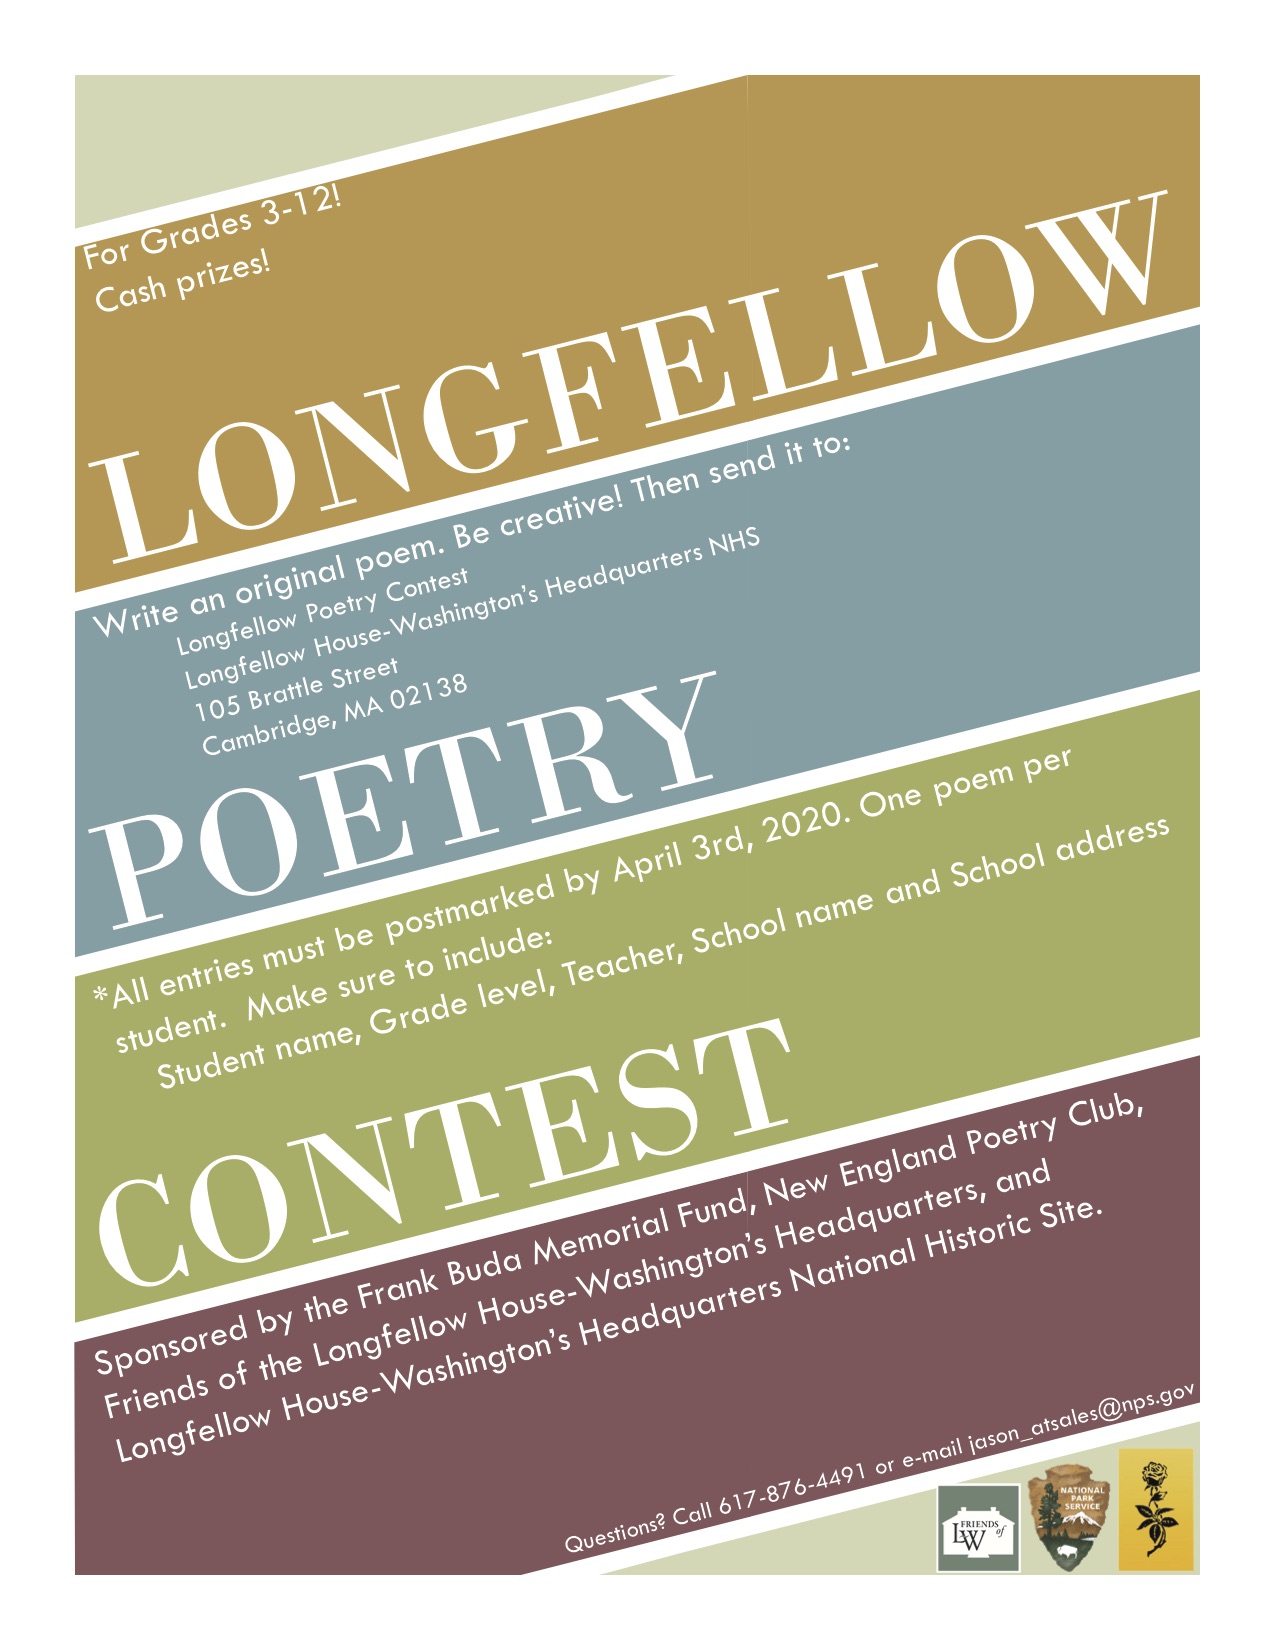 Poetry contest for students in grades 312! Deadline April 3, 2020